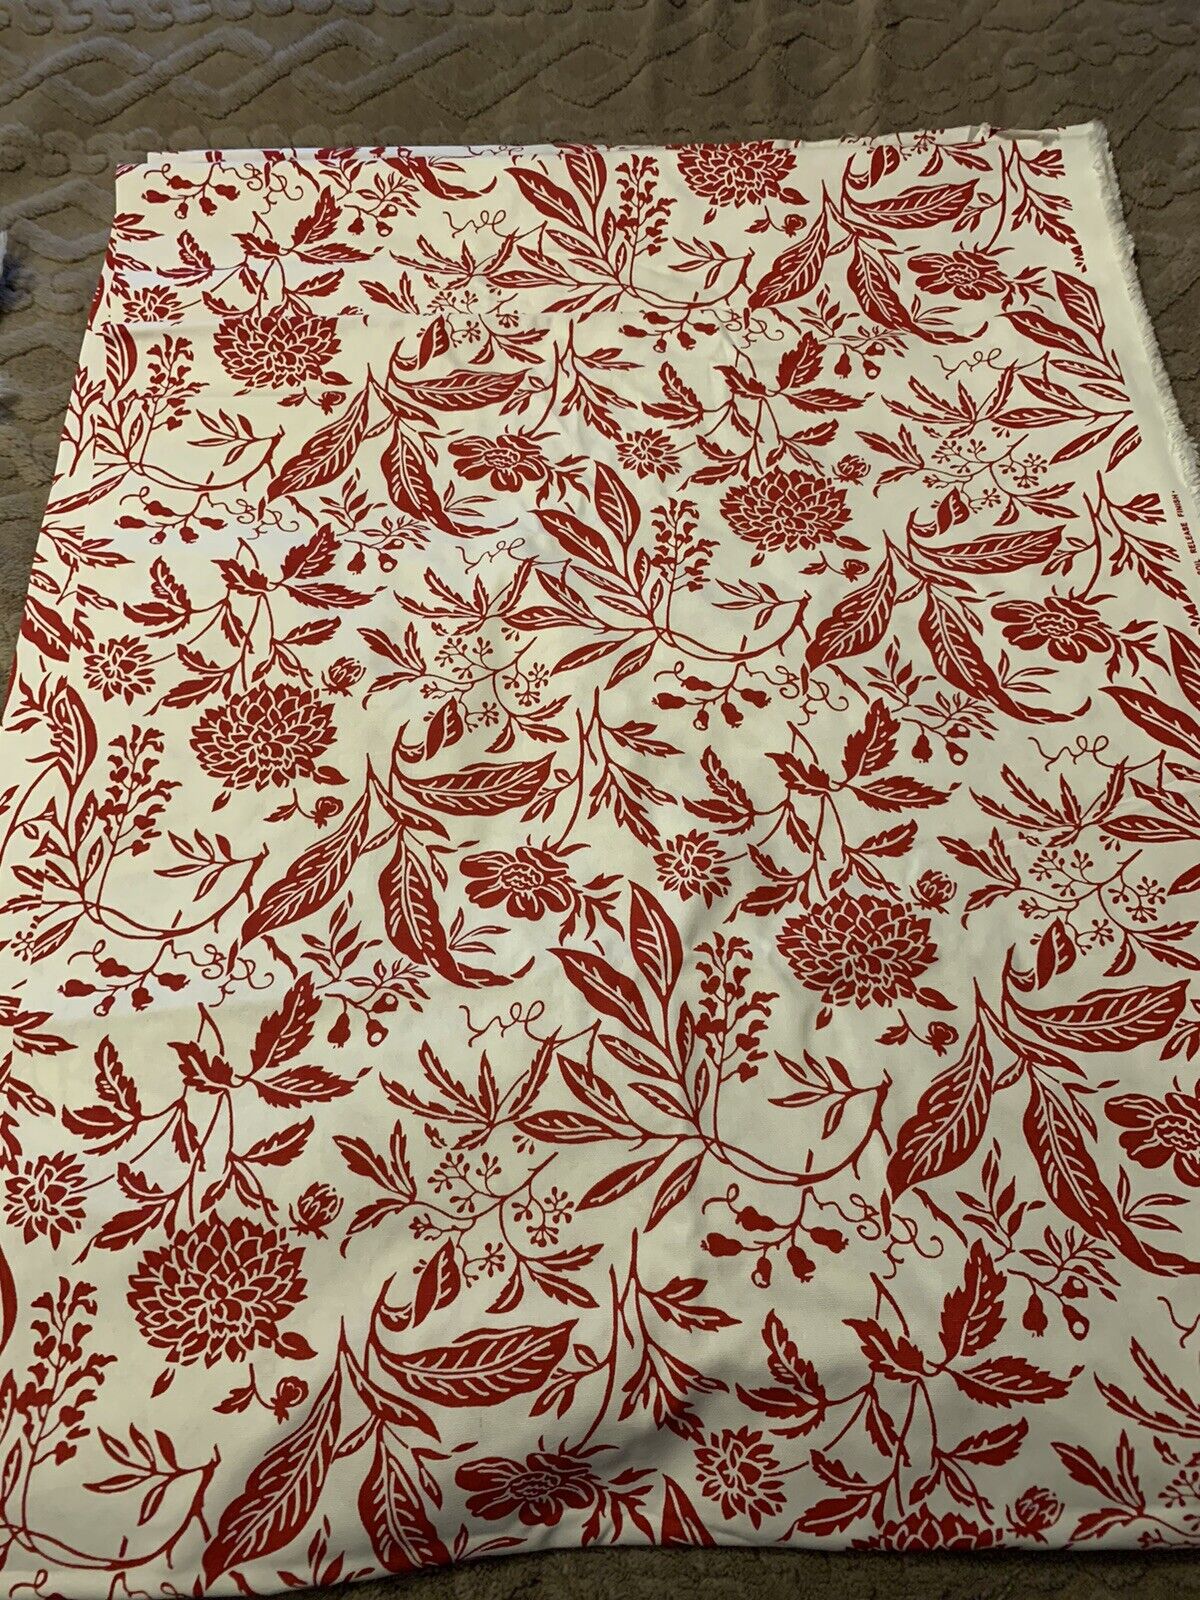 Waverly Soil Release Material Fabric Upholstery Red White Flowers Floral 280x54